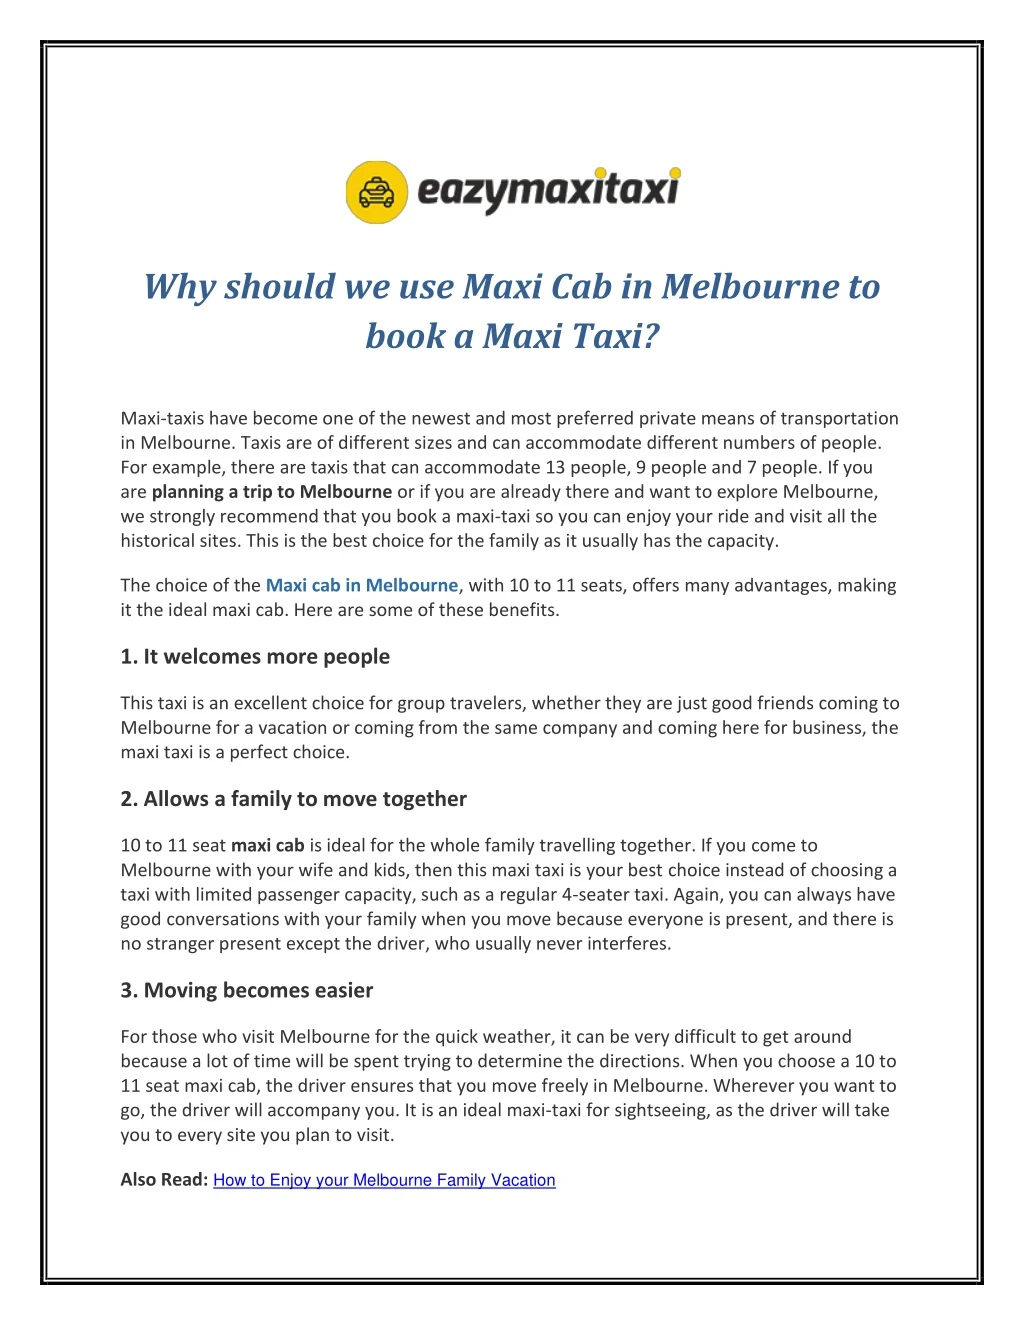 why should we use maxi cab in melbourne to book